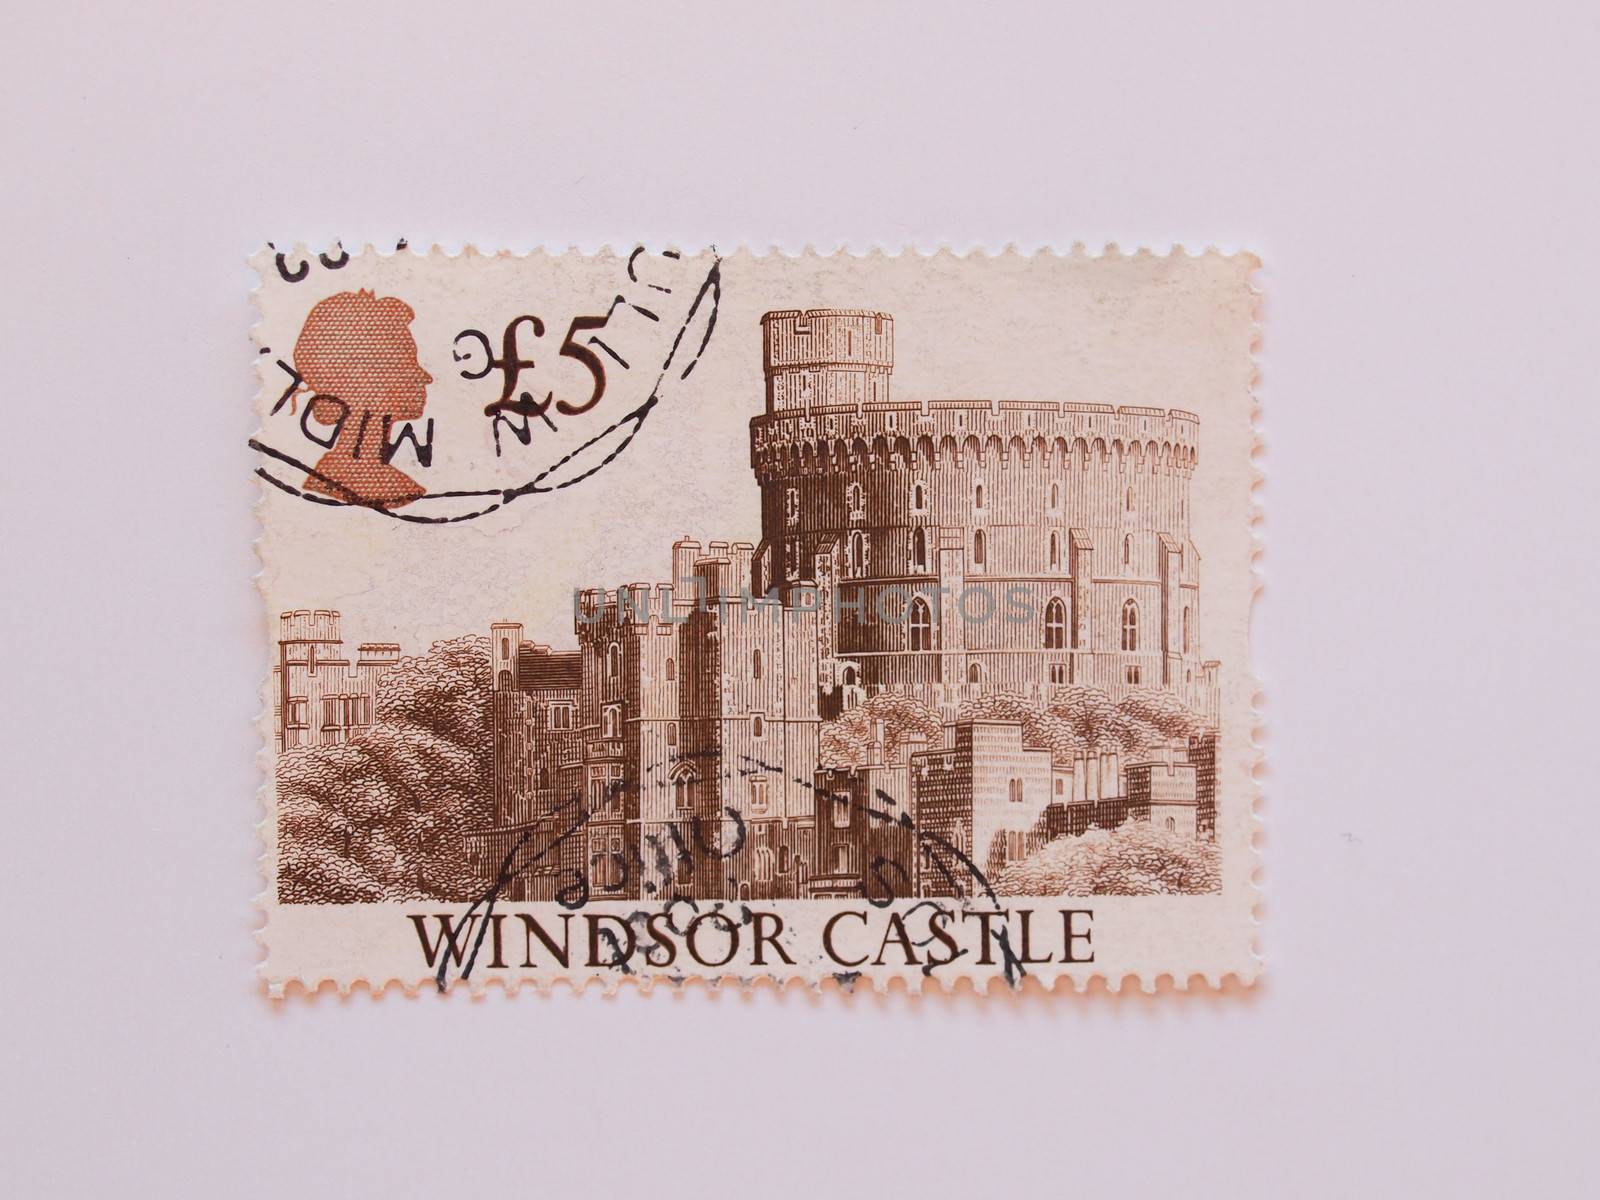 UK, CIRCA 1977 - Mail stamp bearing the Royal Castle of Windsor, released in the UK circa 1977